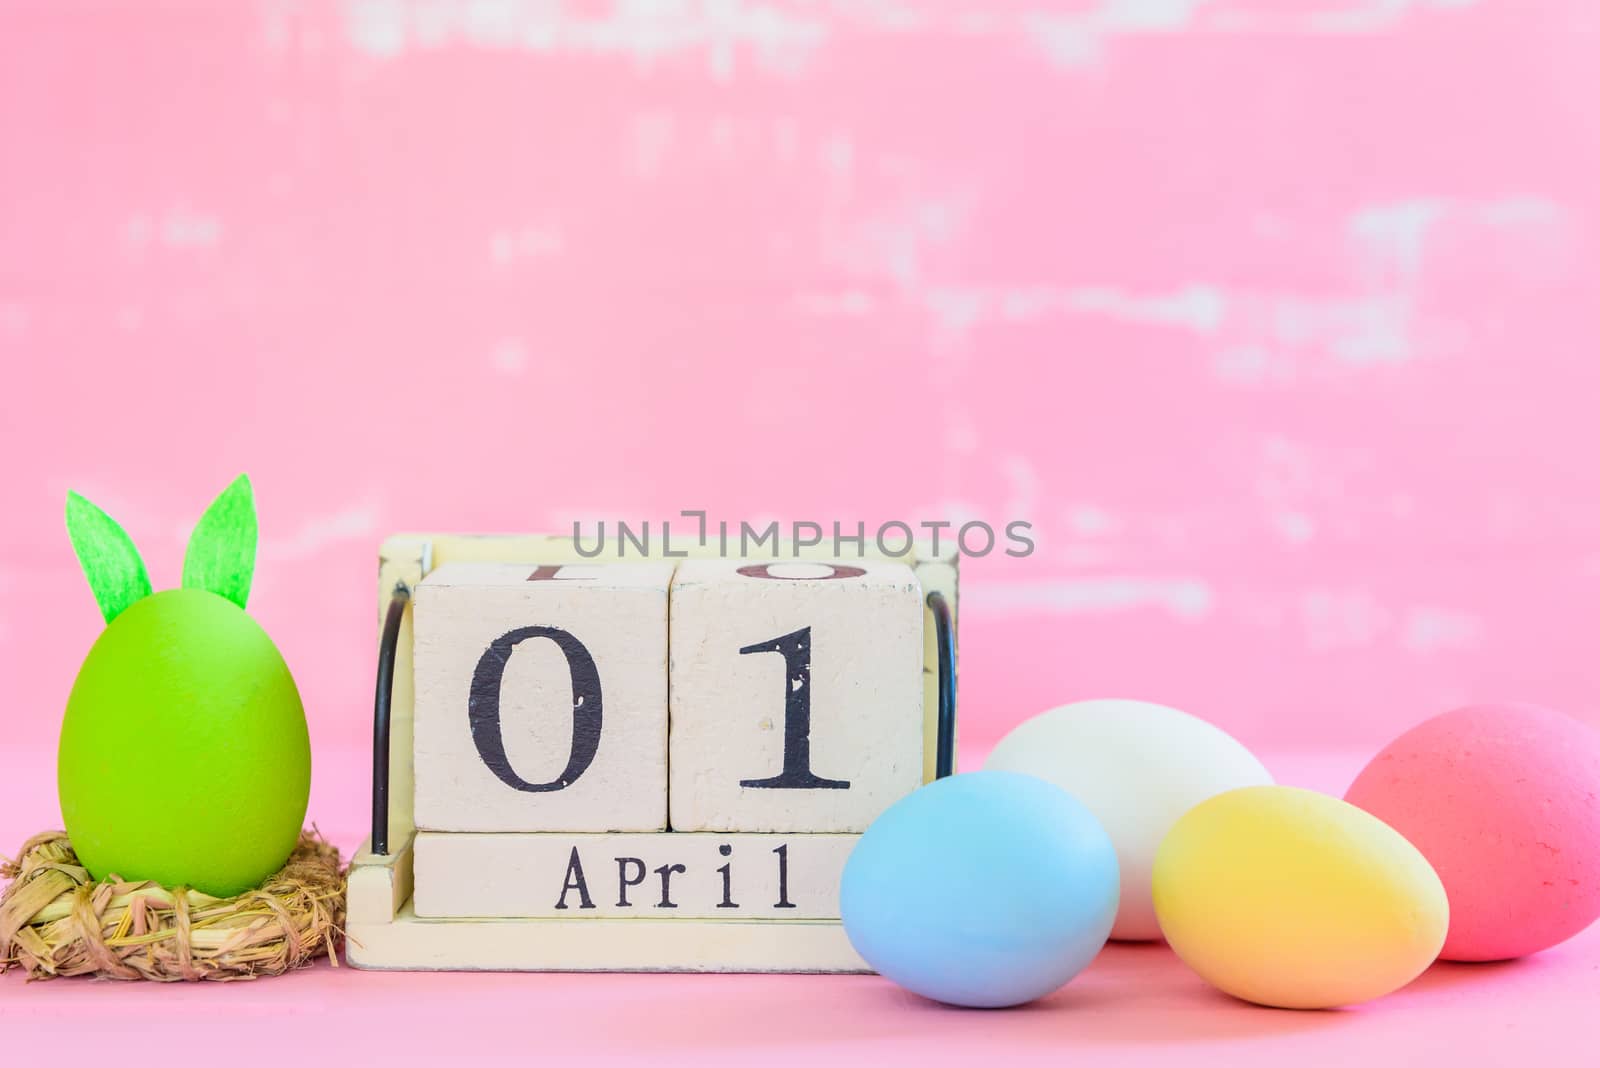 Row Easter eggs with colorful paper flowers on bright pink and white wooden background.